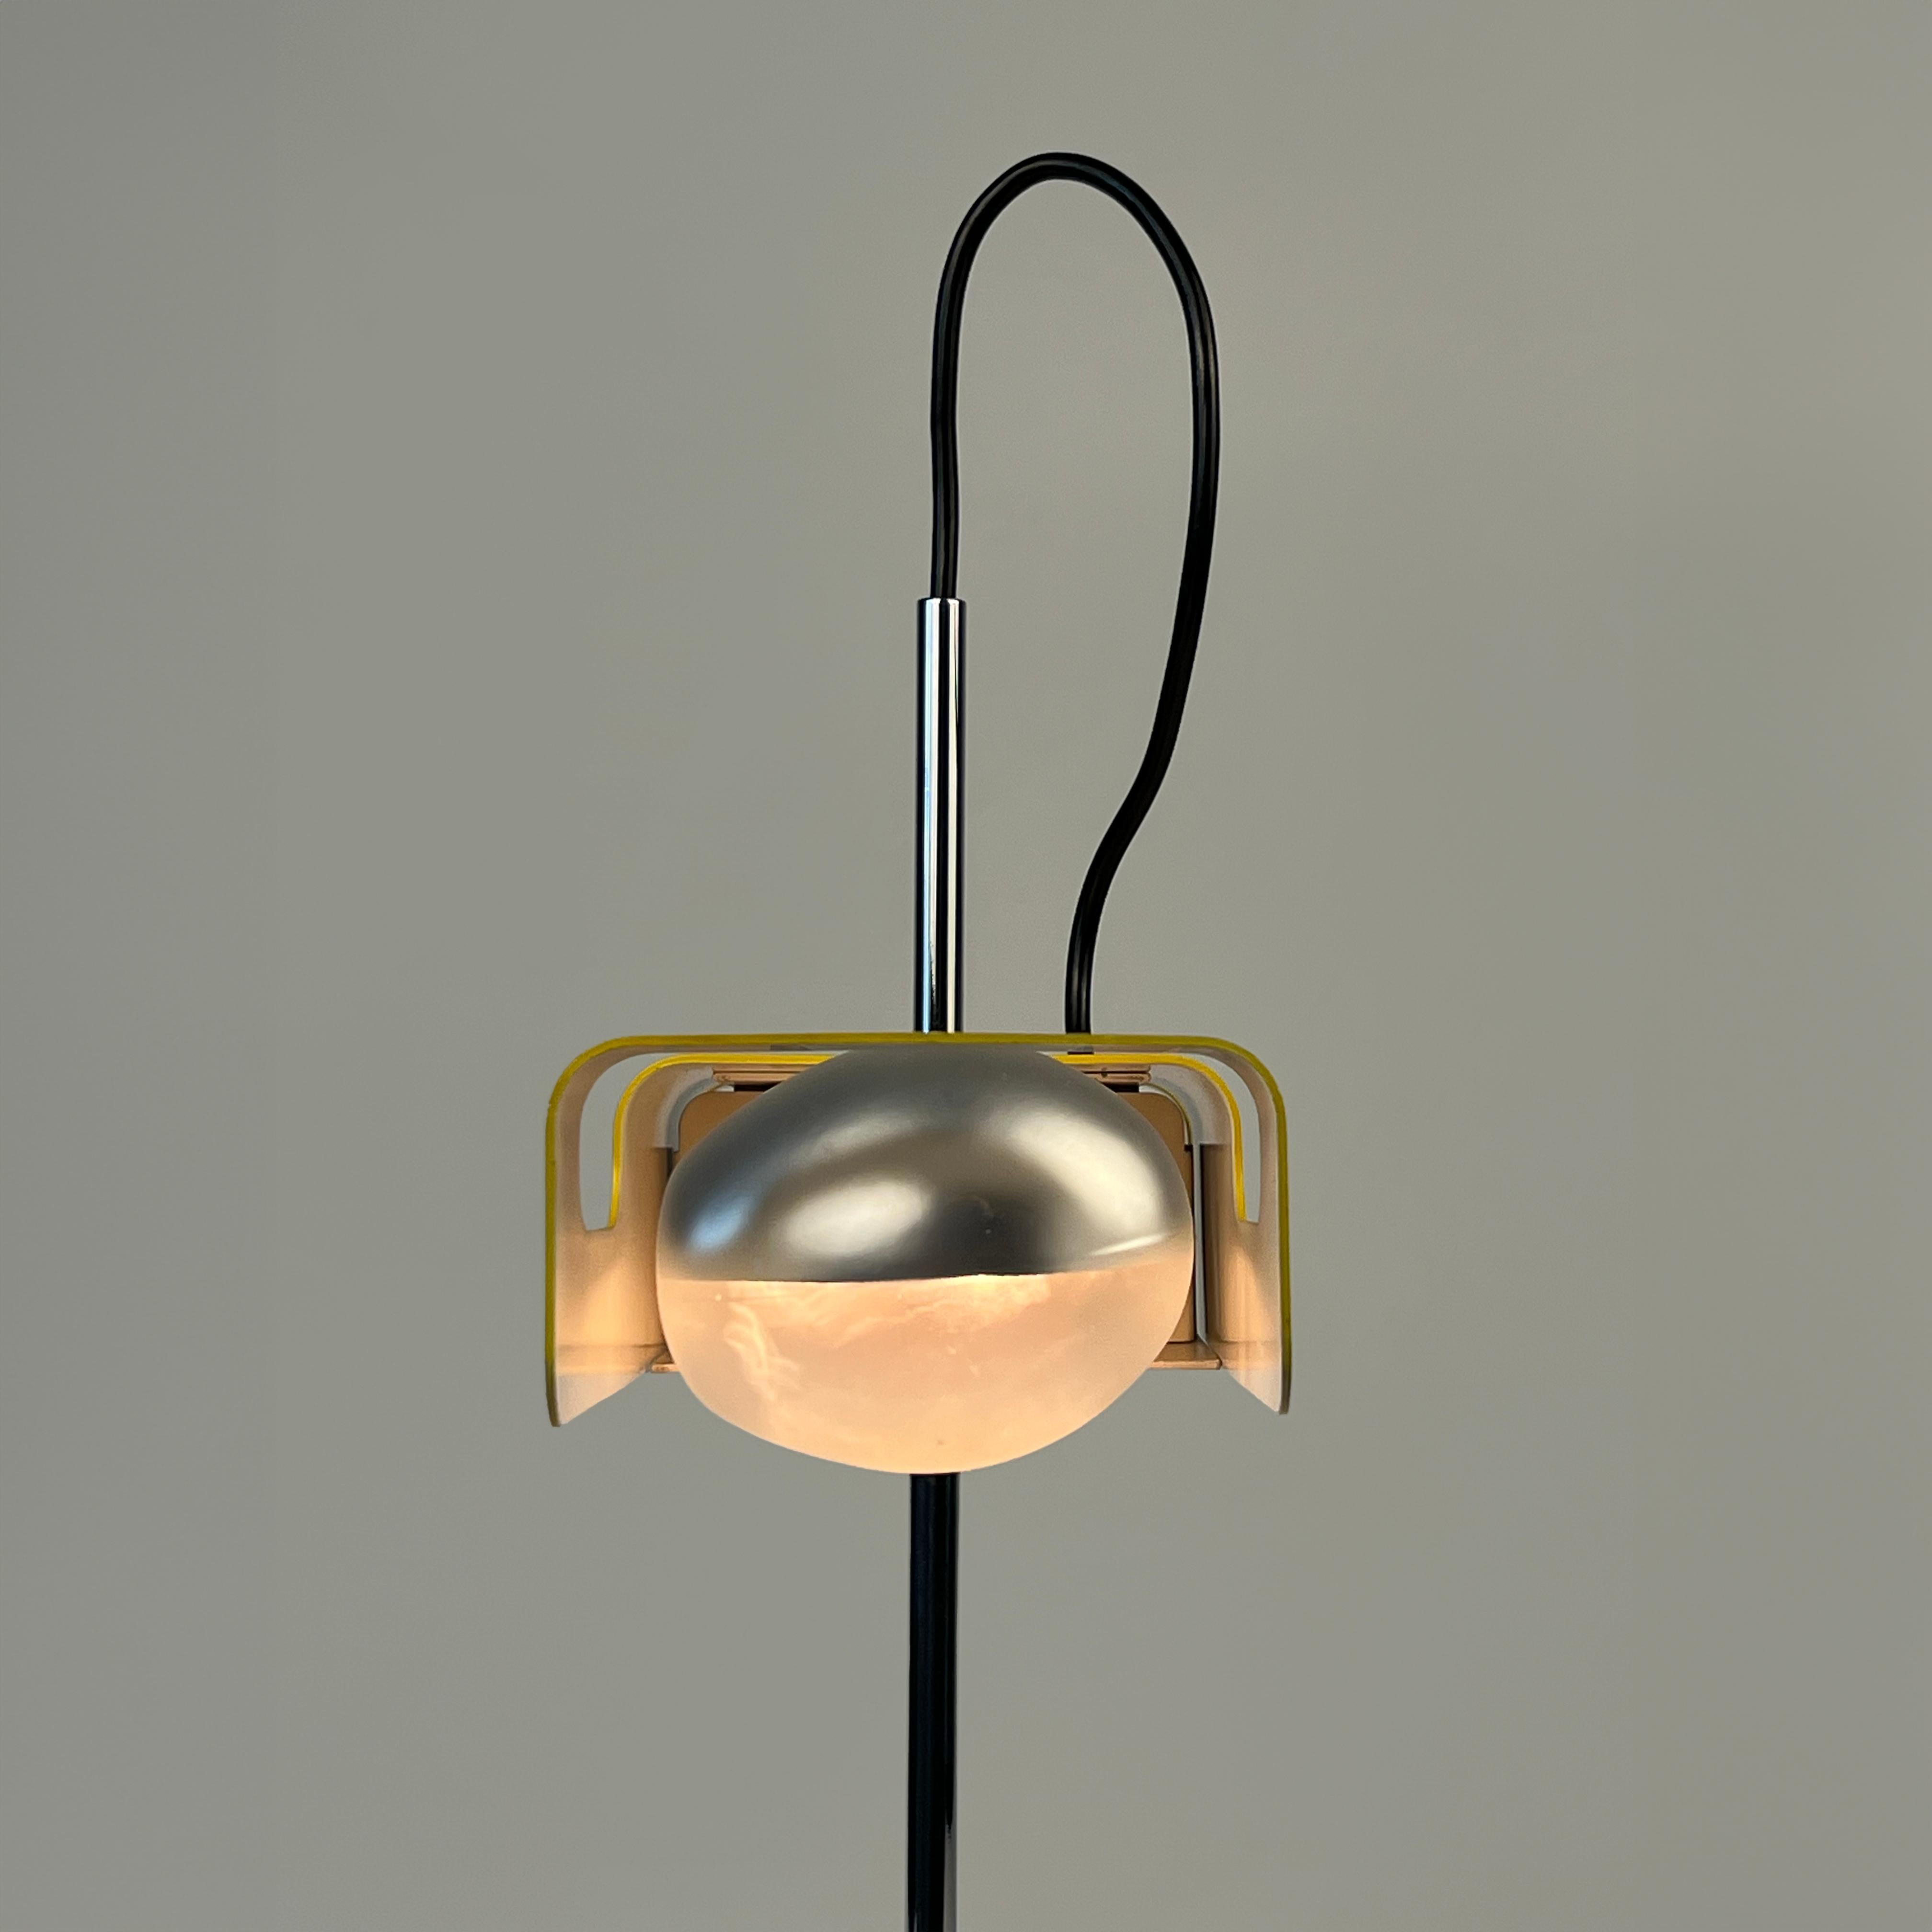 Spider Table Lamp designed by Joe Colombo for Oluce, 1st edition. Italy, 1965 For Sale 7